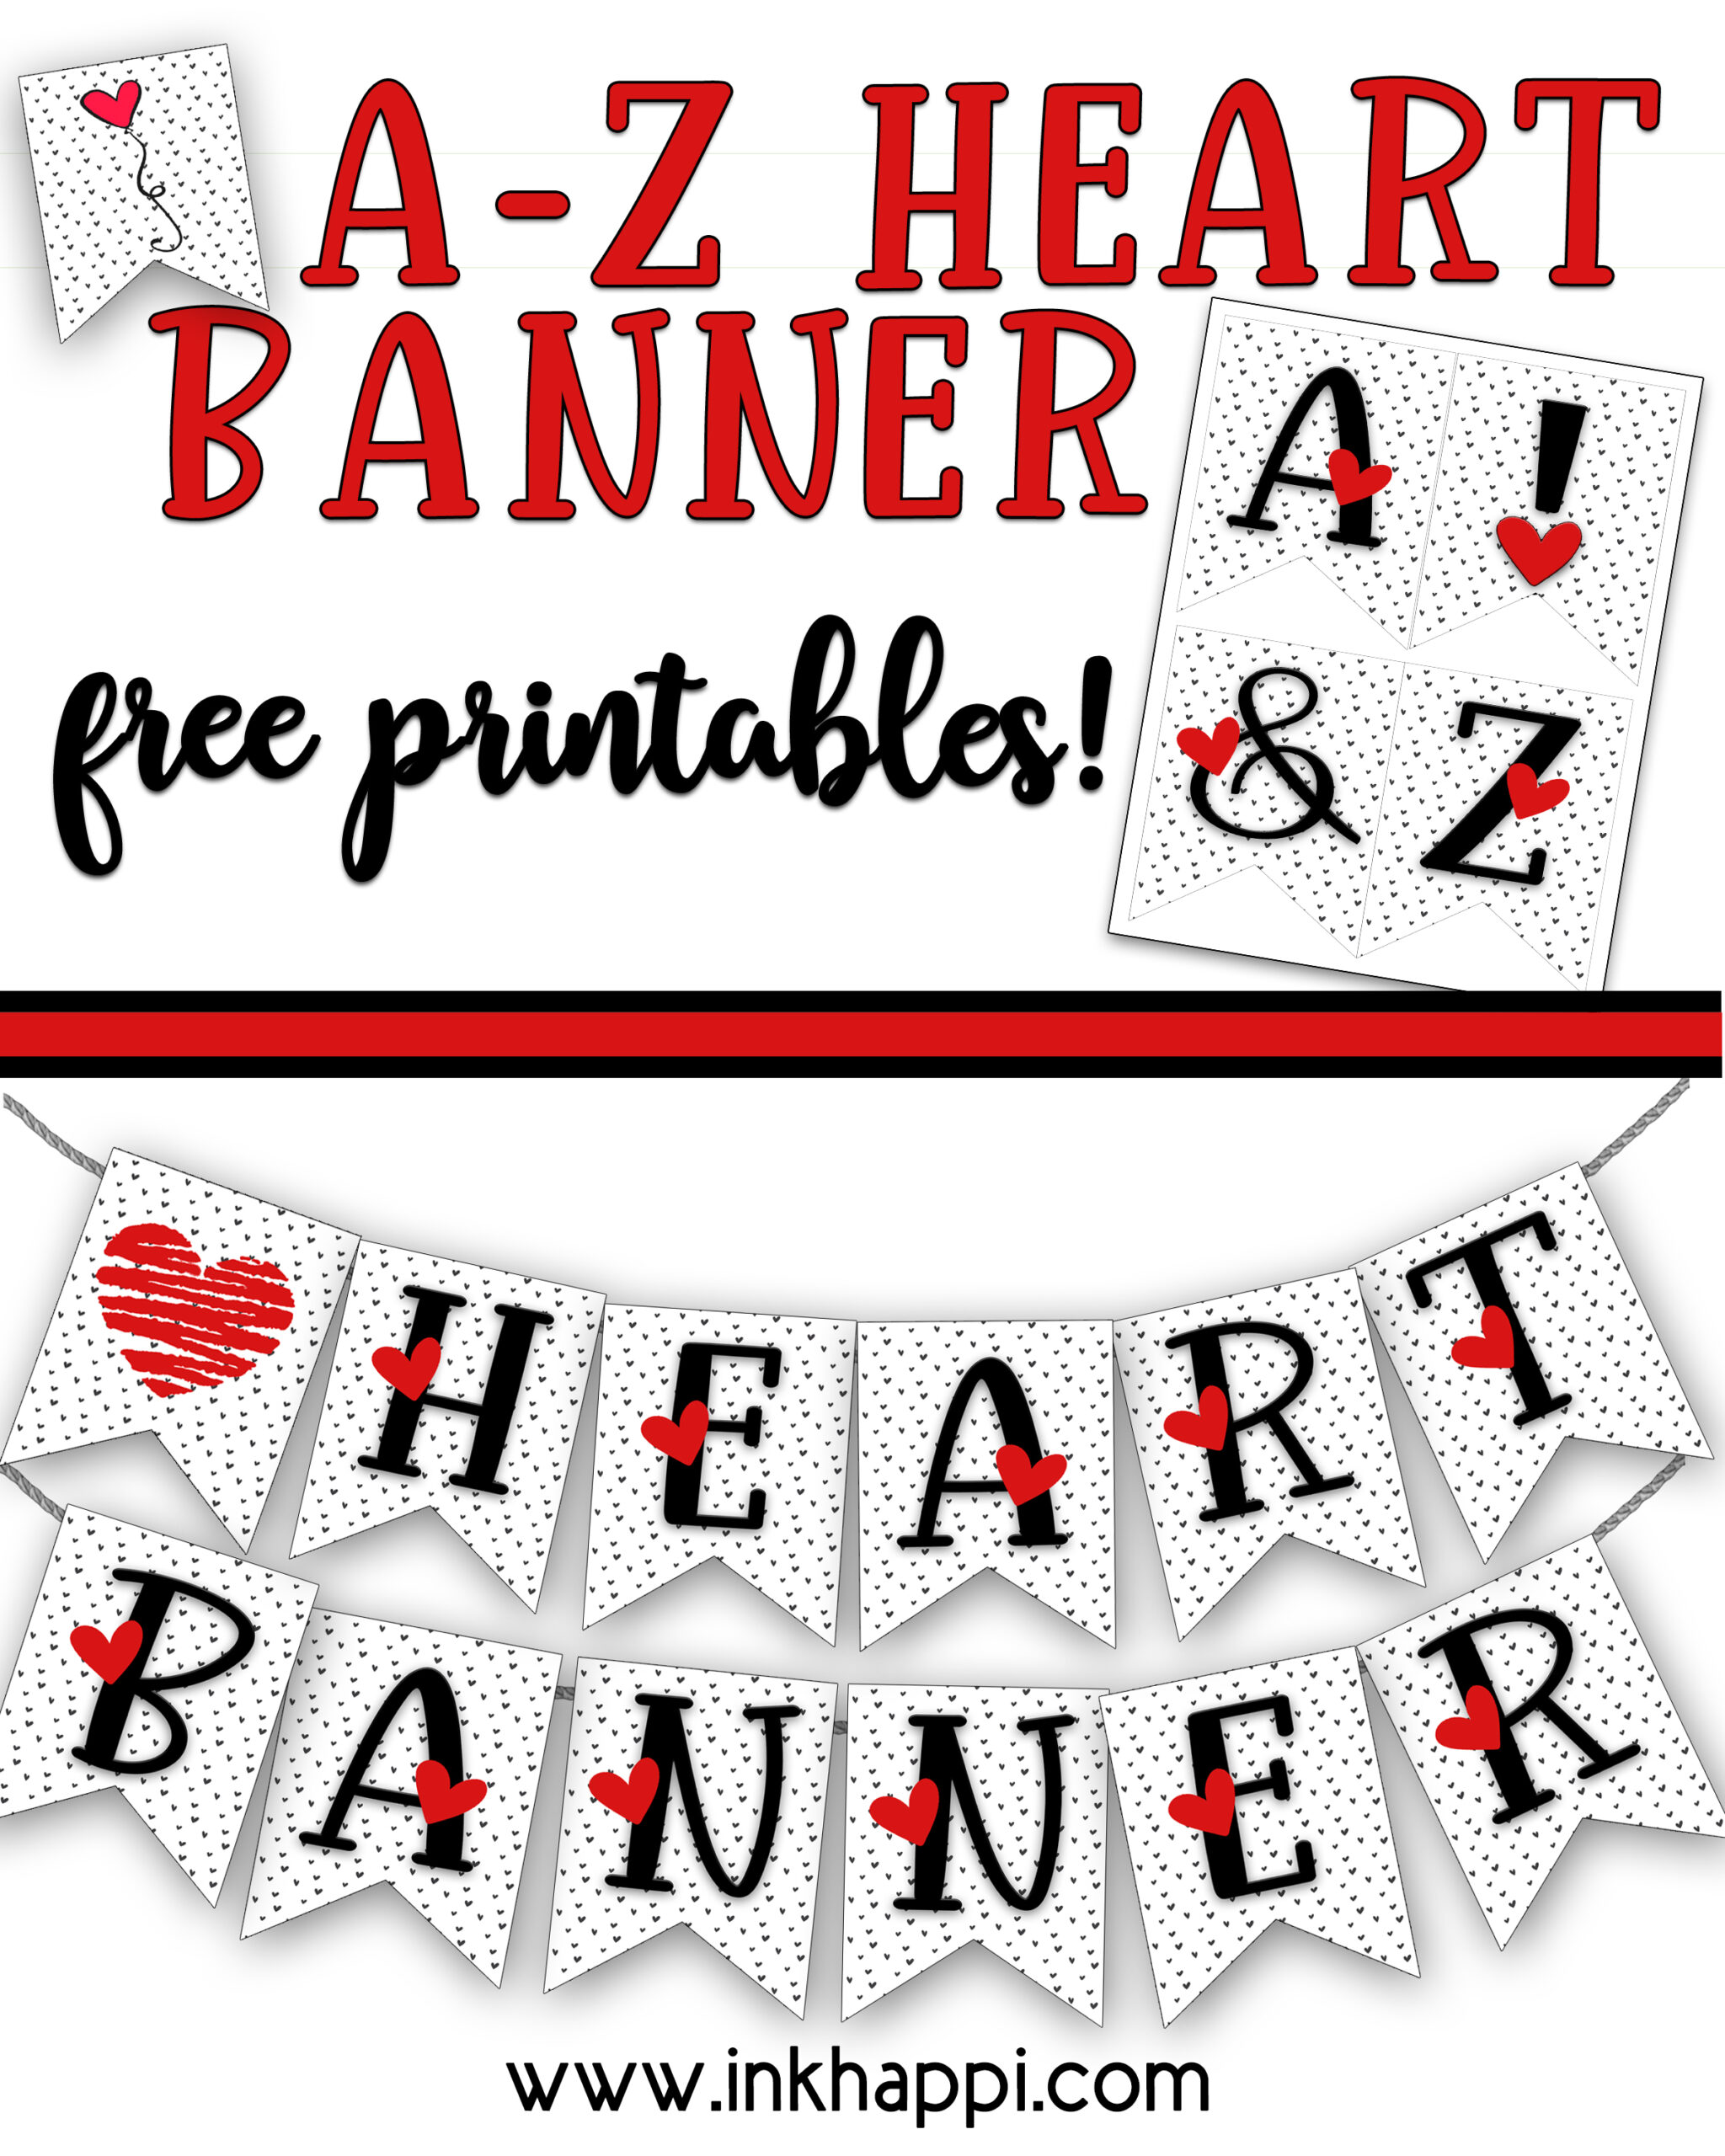 heart banner free printables to print and share the love inkhappi